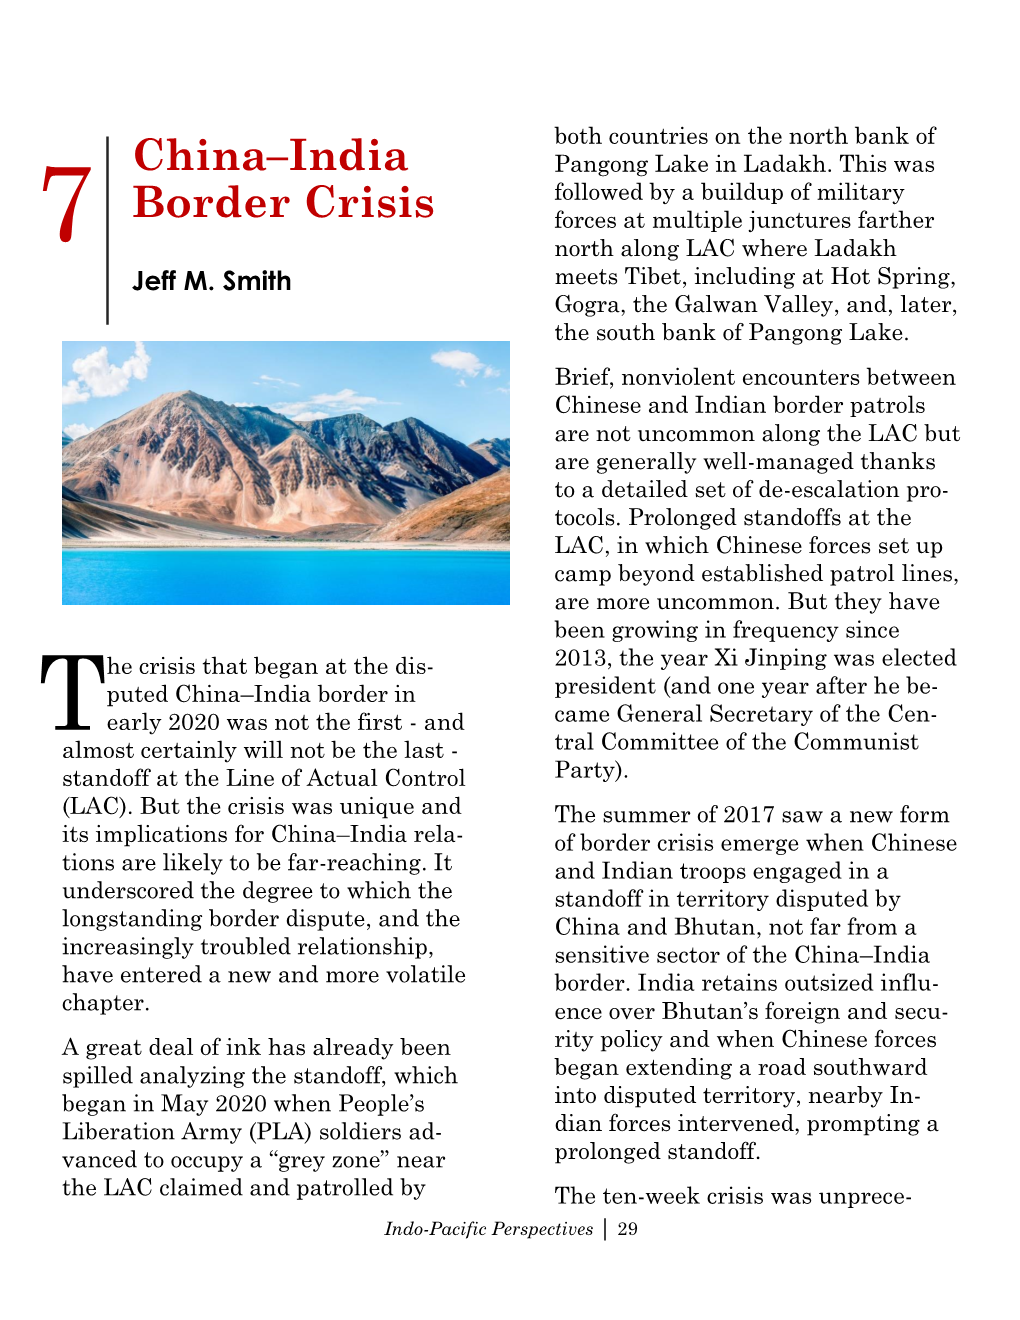 China–India Border Crisis Dented in Some Ways, Including the Infrastructure